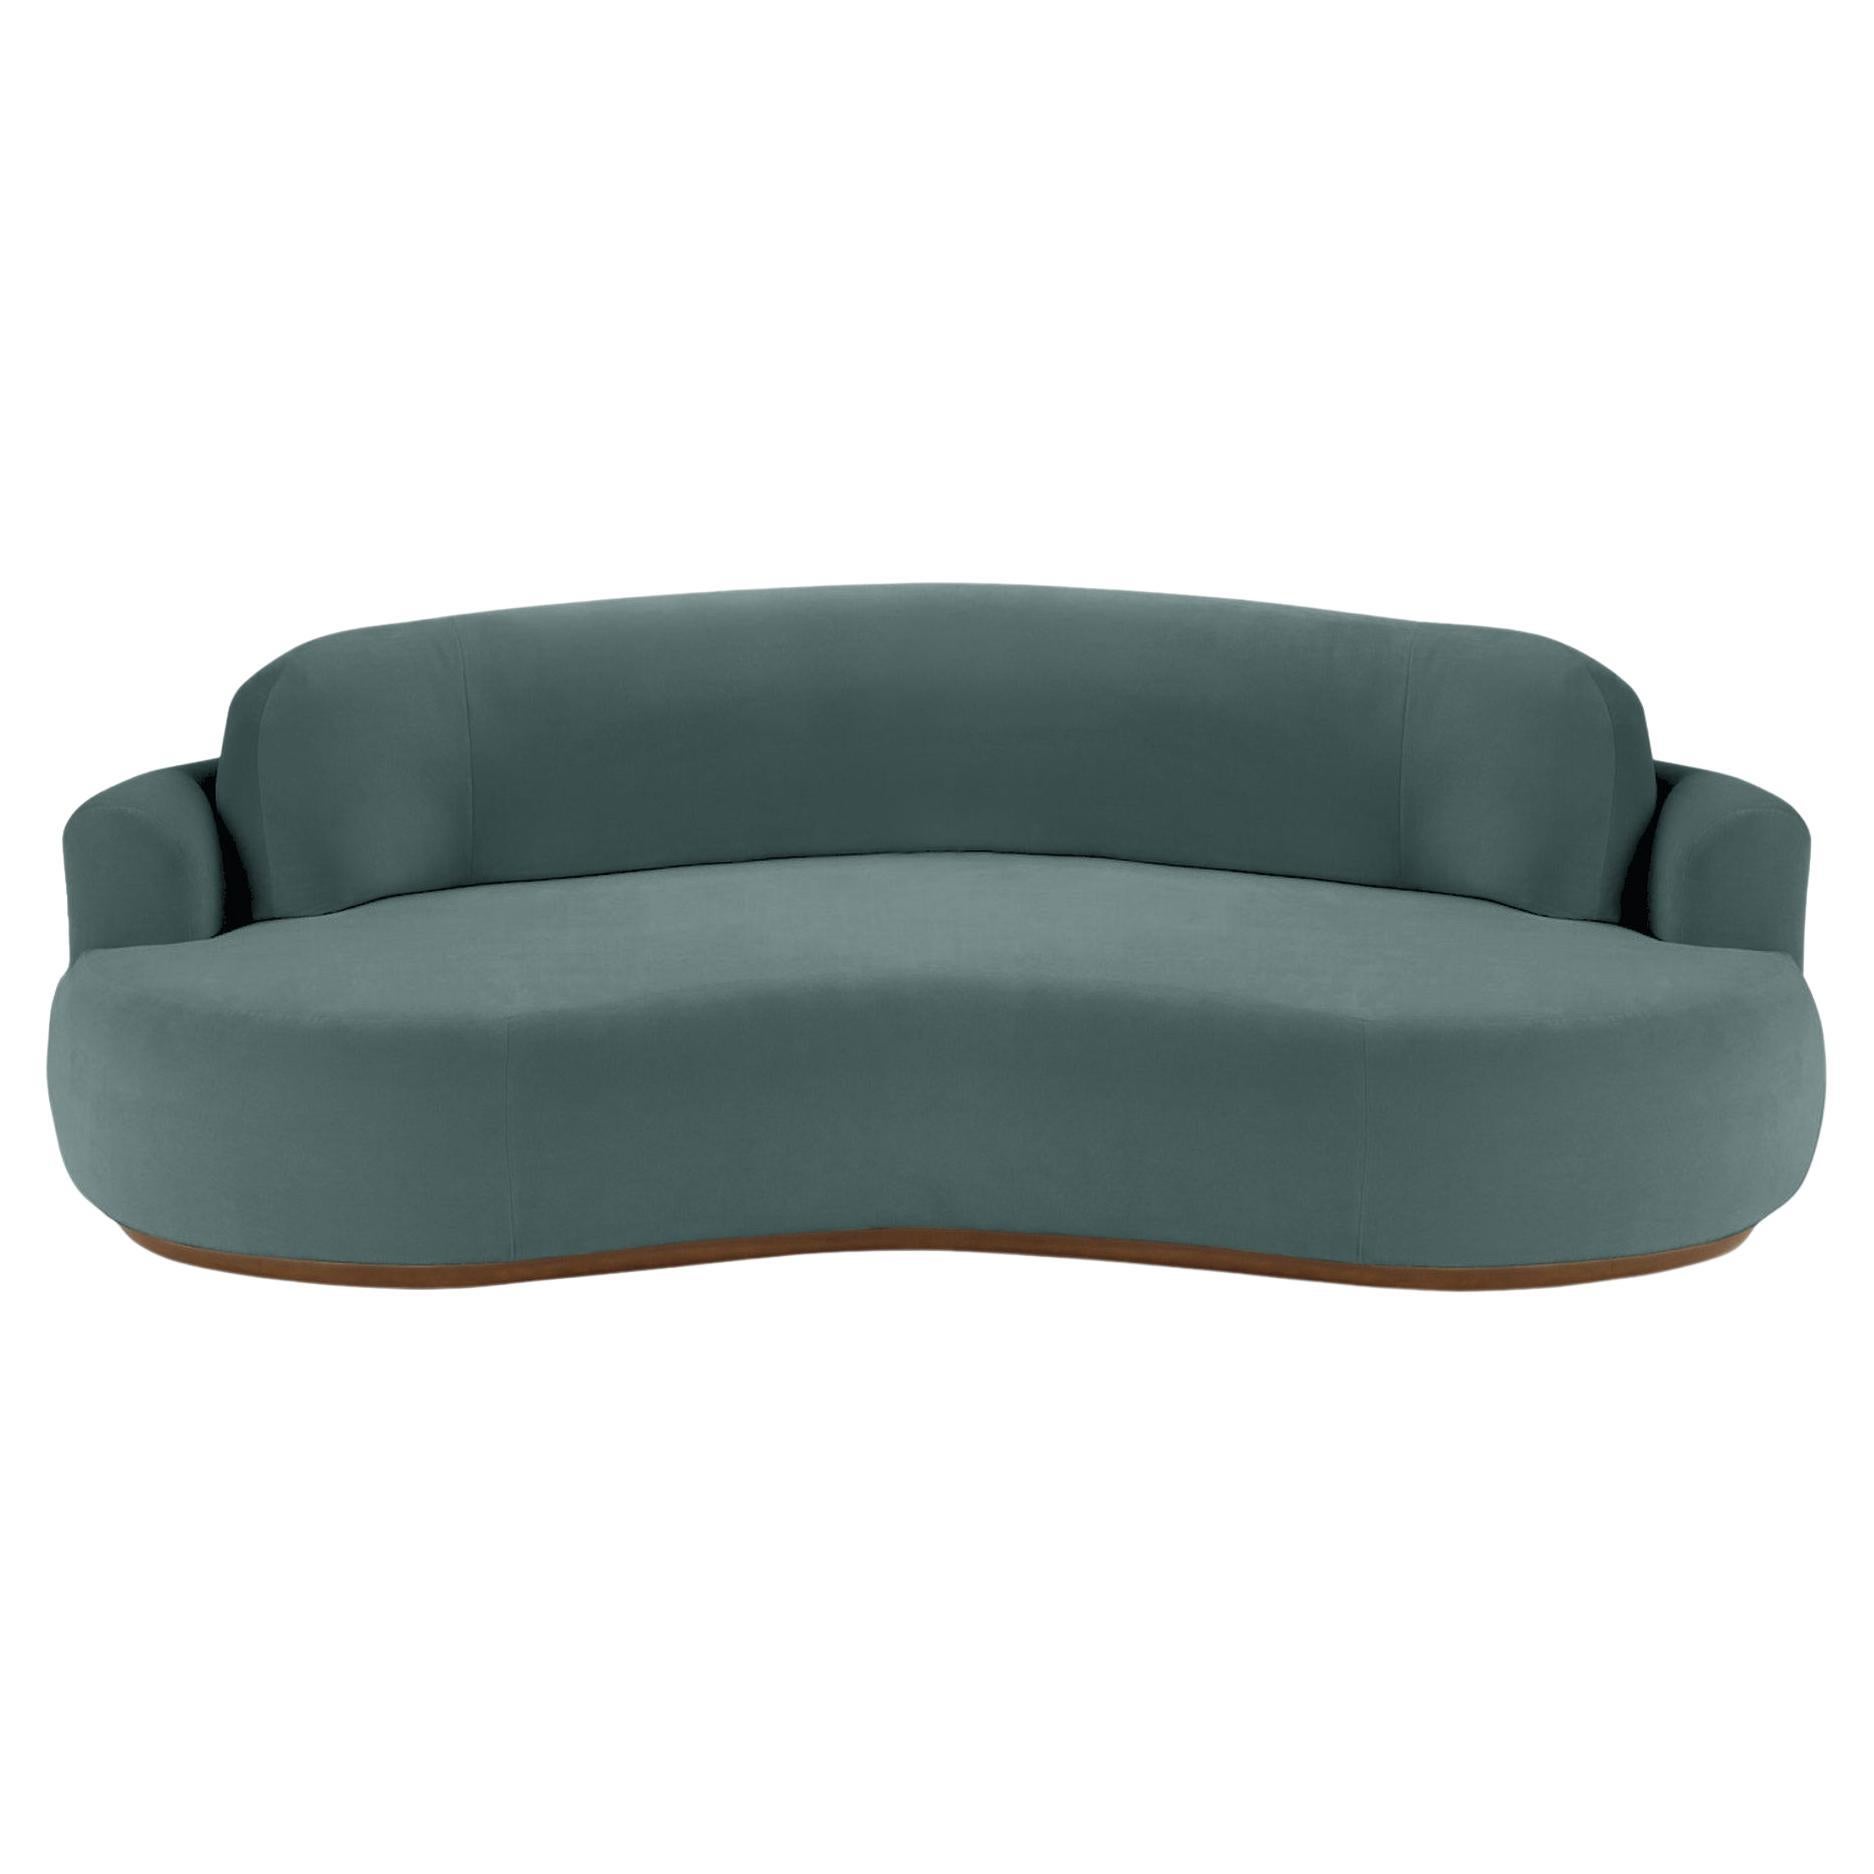 Naked Round Sofa, Large with Beech Ash-056-1 and Teal